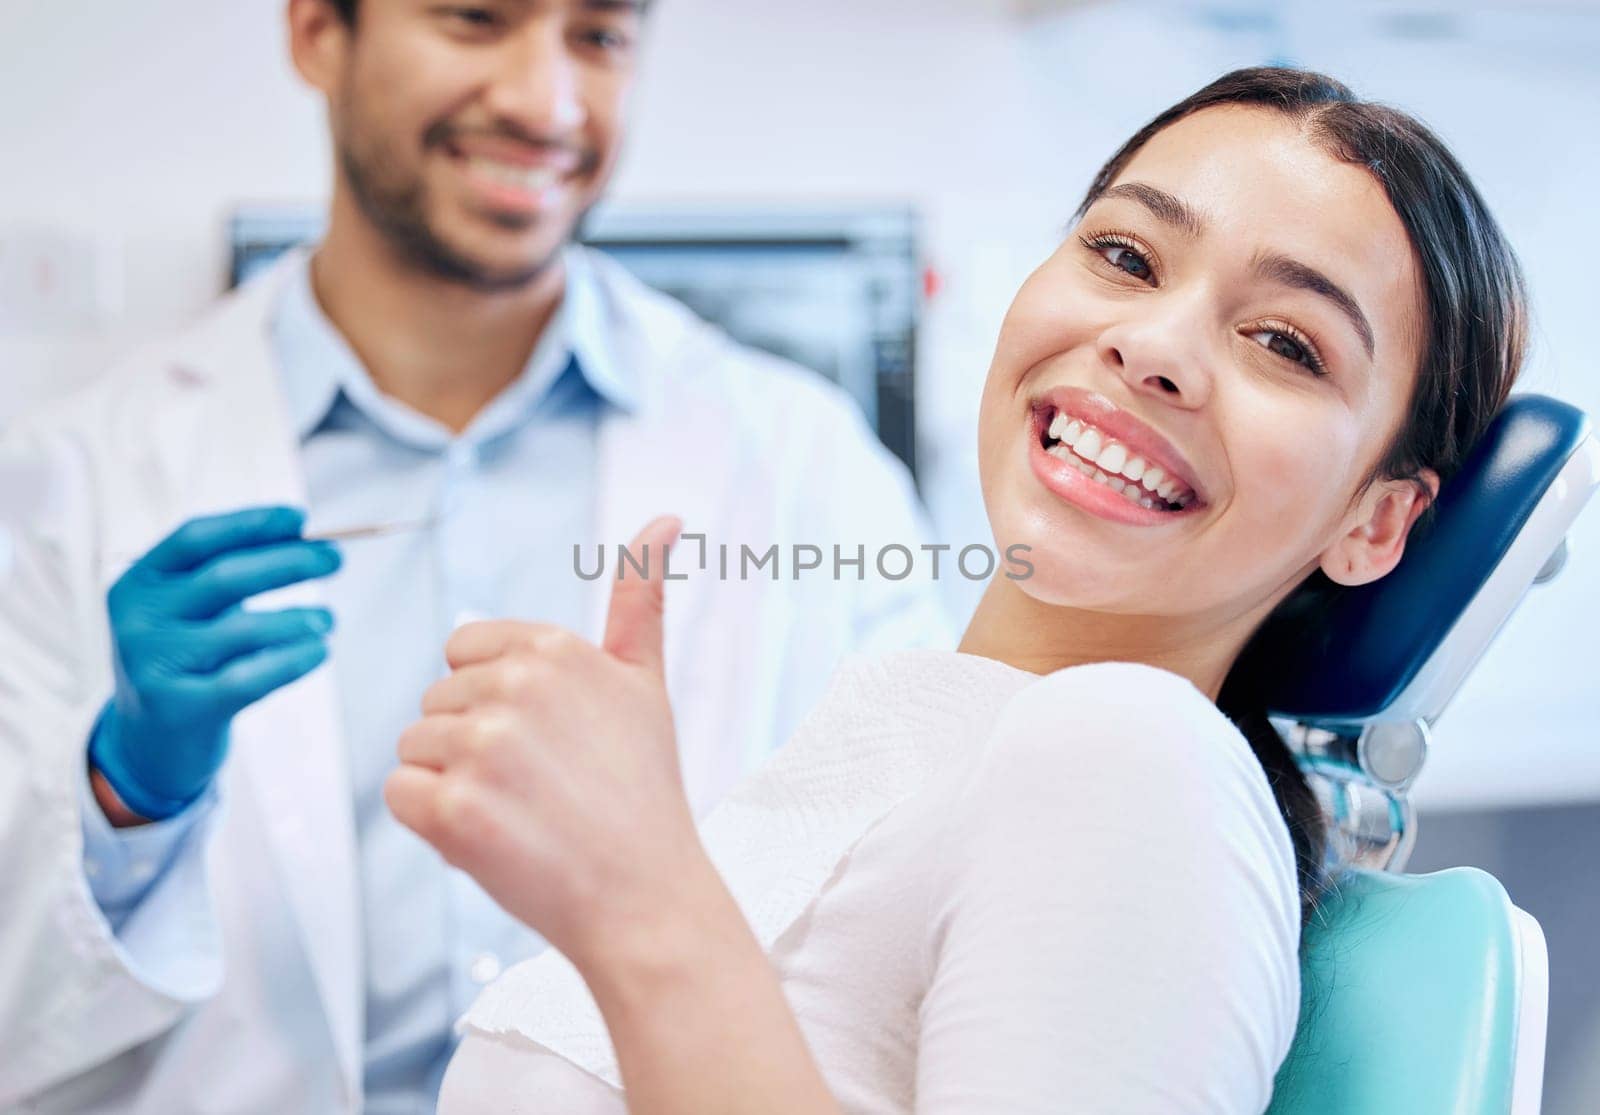 Happy, thumbs up and portrait of dentist and patient for teeth whitening, service and dental care. Healthcare, dentistry and hand sign of orthodontist and woman for oral hygiene, wellness or cleaning by YuriArcurs